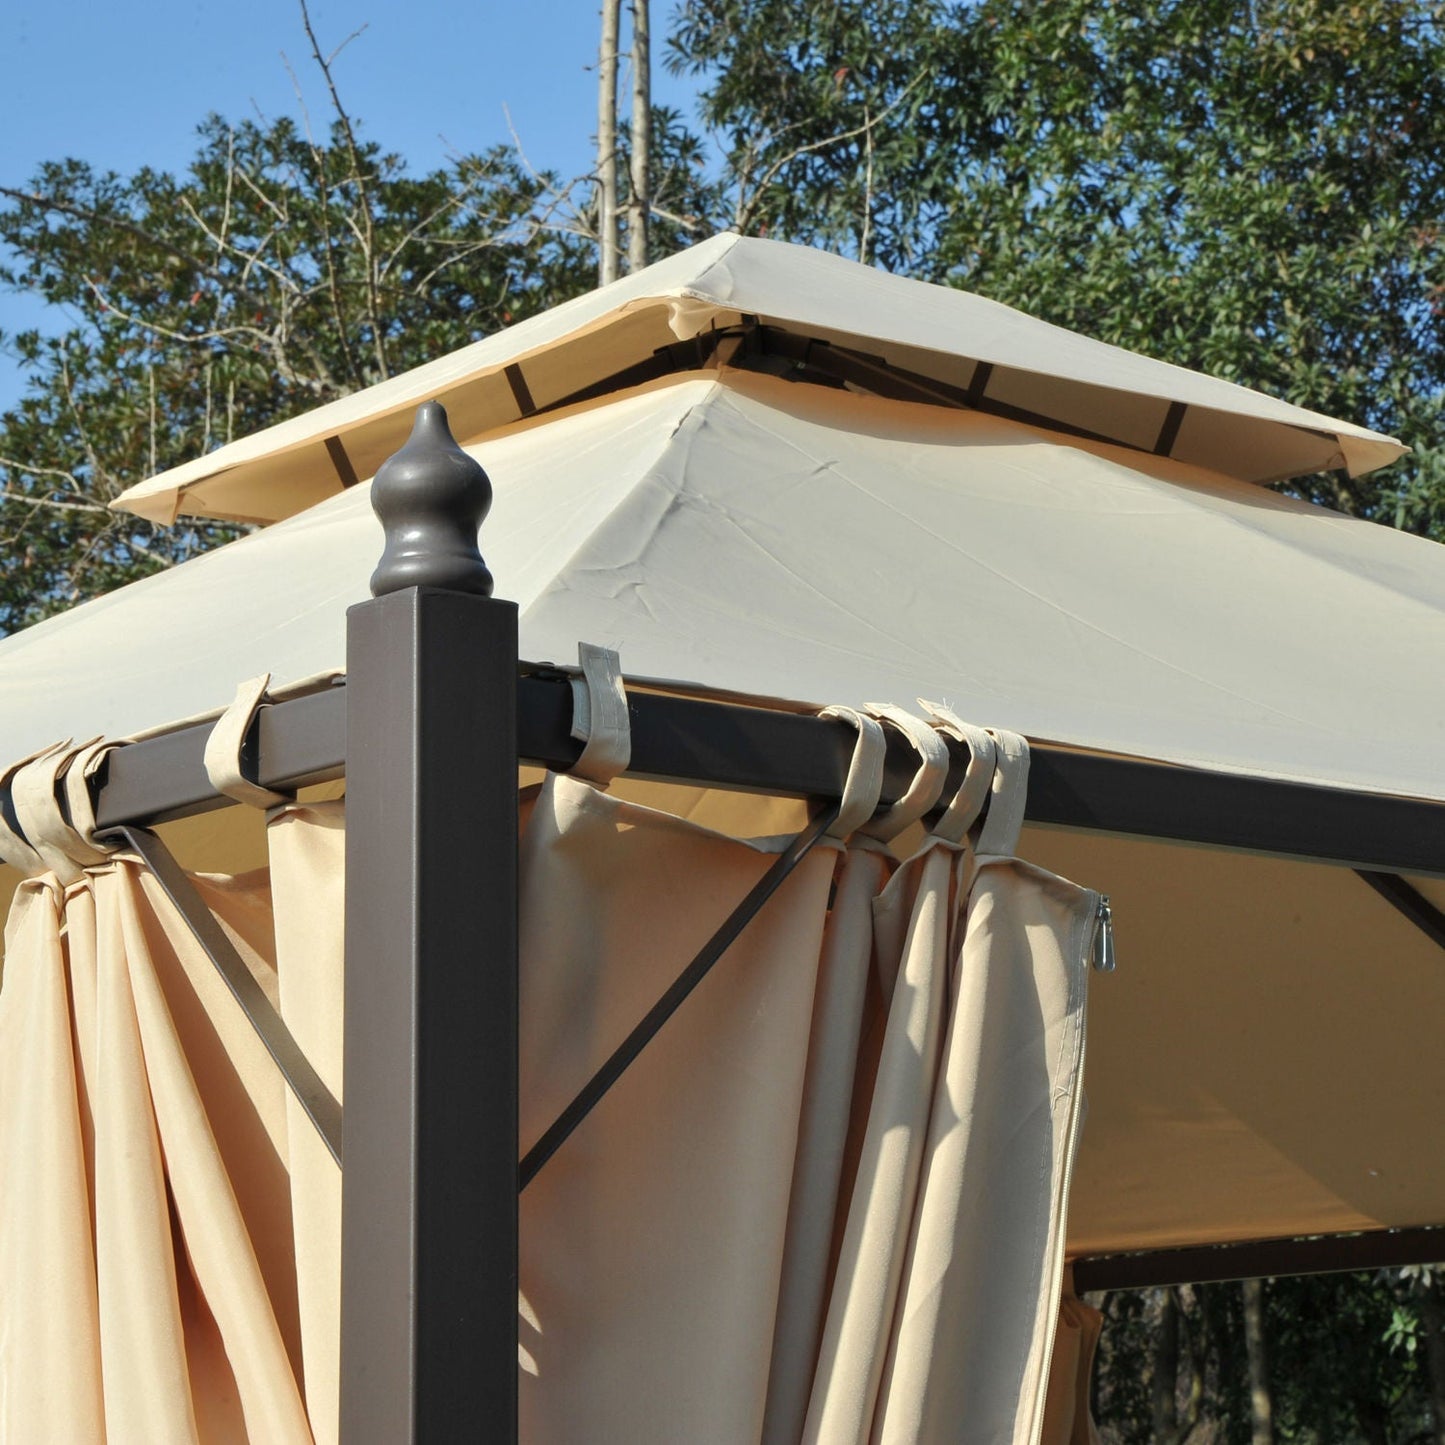 10x10ft Patio Gazebo Canopy Double-tire Garden Shelter Outdoor Sun Shade with Curtains, Beige Gazebos   at Gallery Canada